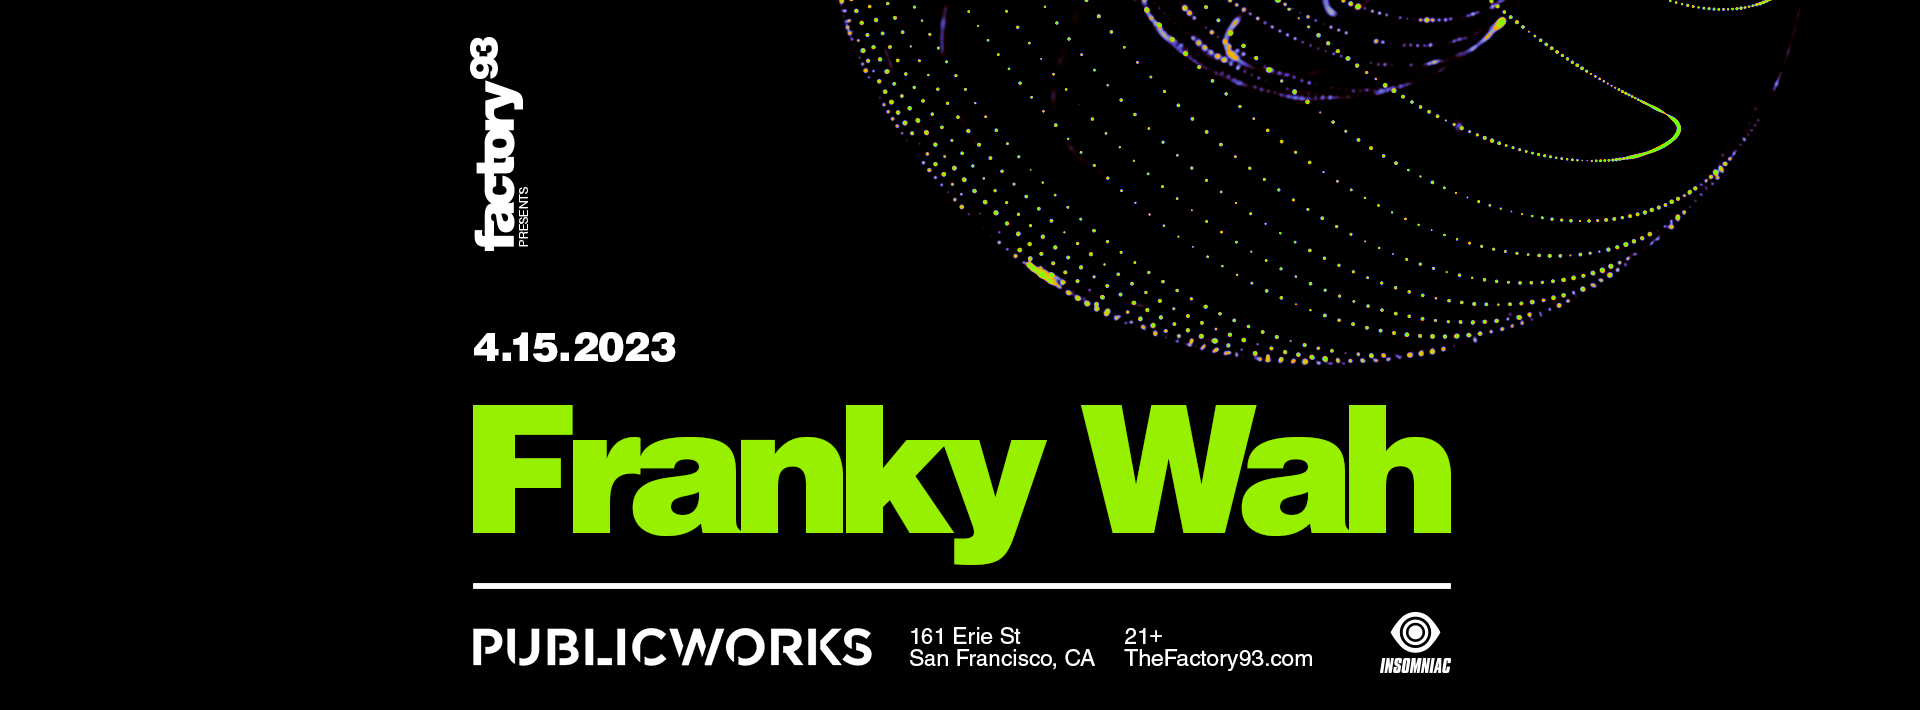 Franky Wah at Public Works